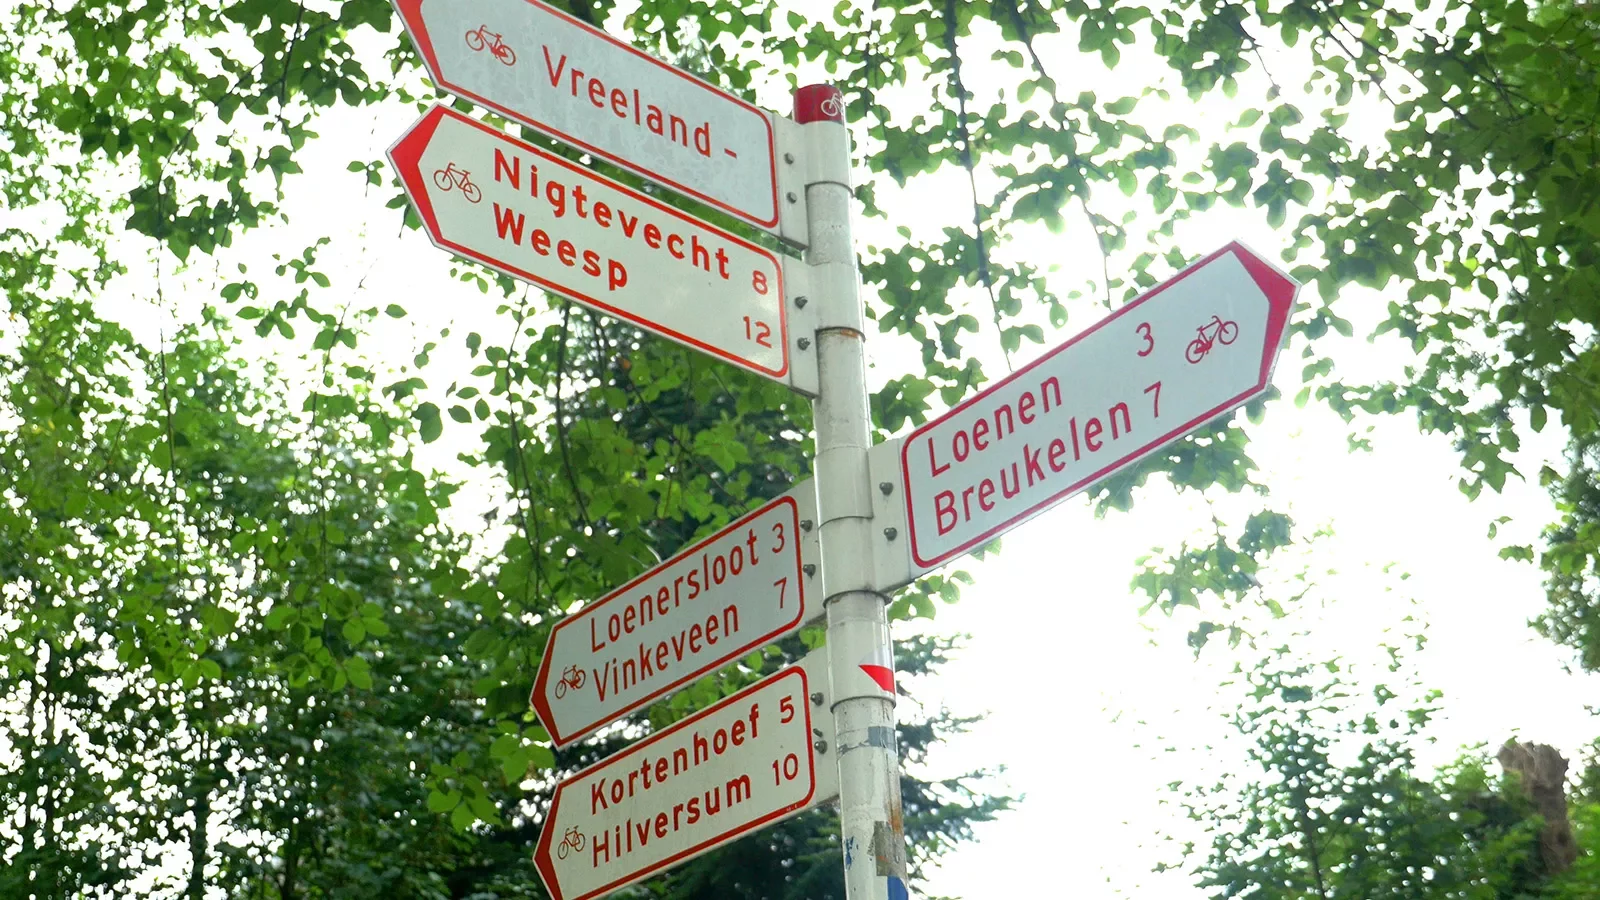 Street signs in town pointing multiple directions